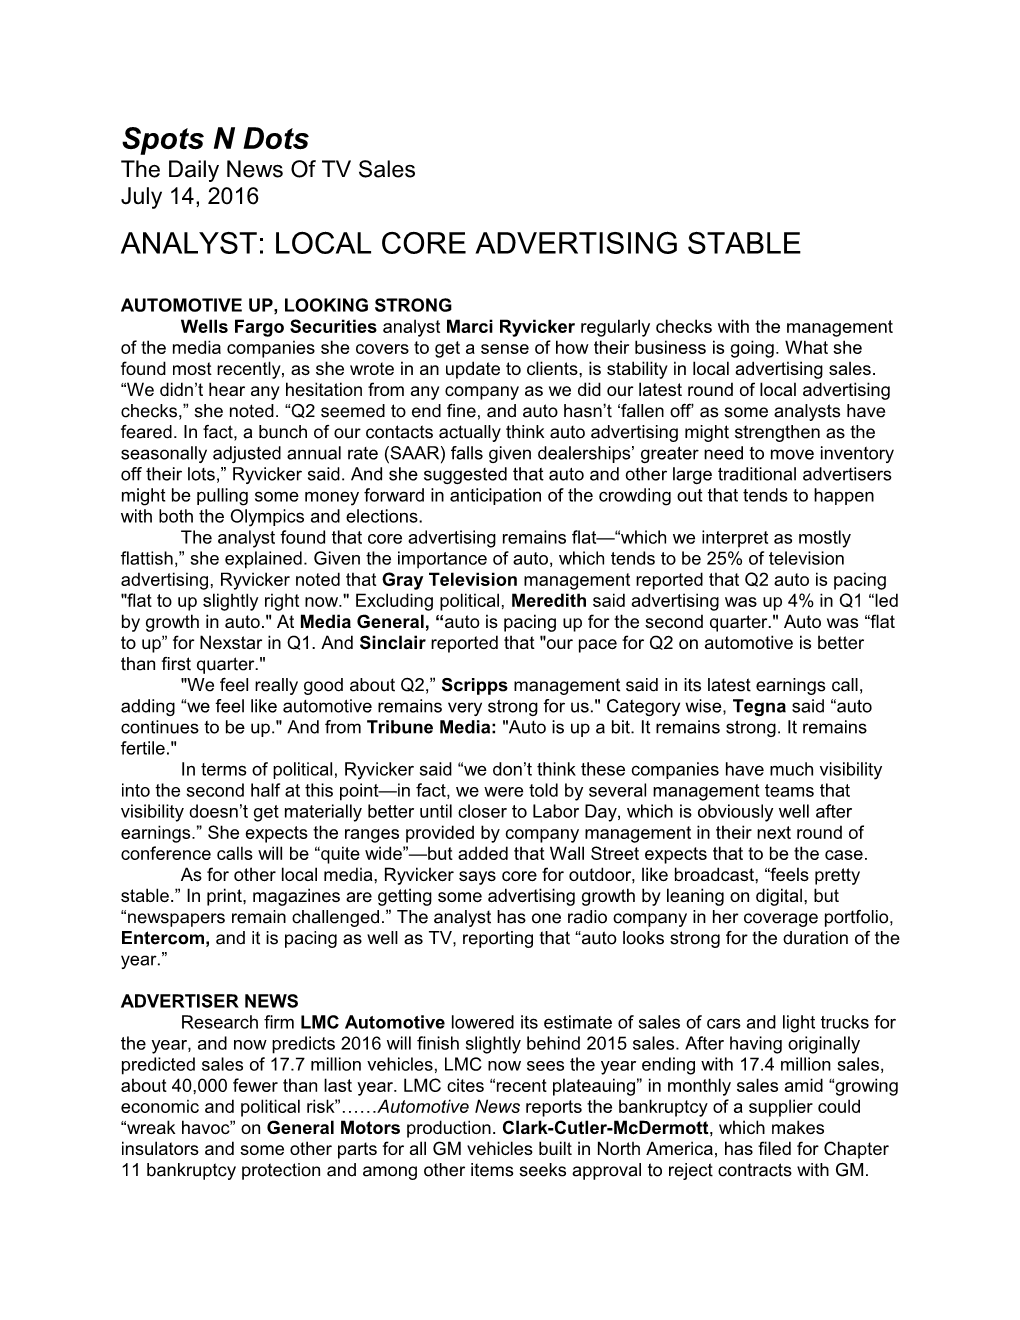 Analyst: Local Core Advertising Stable